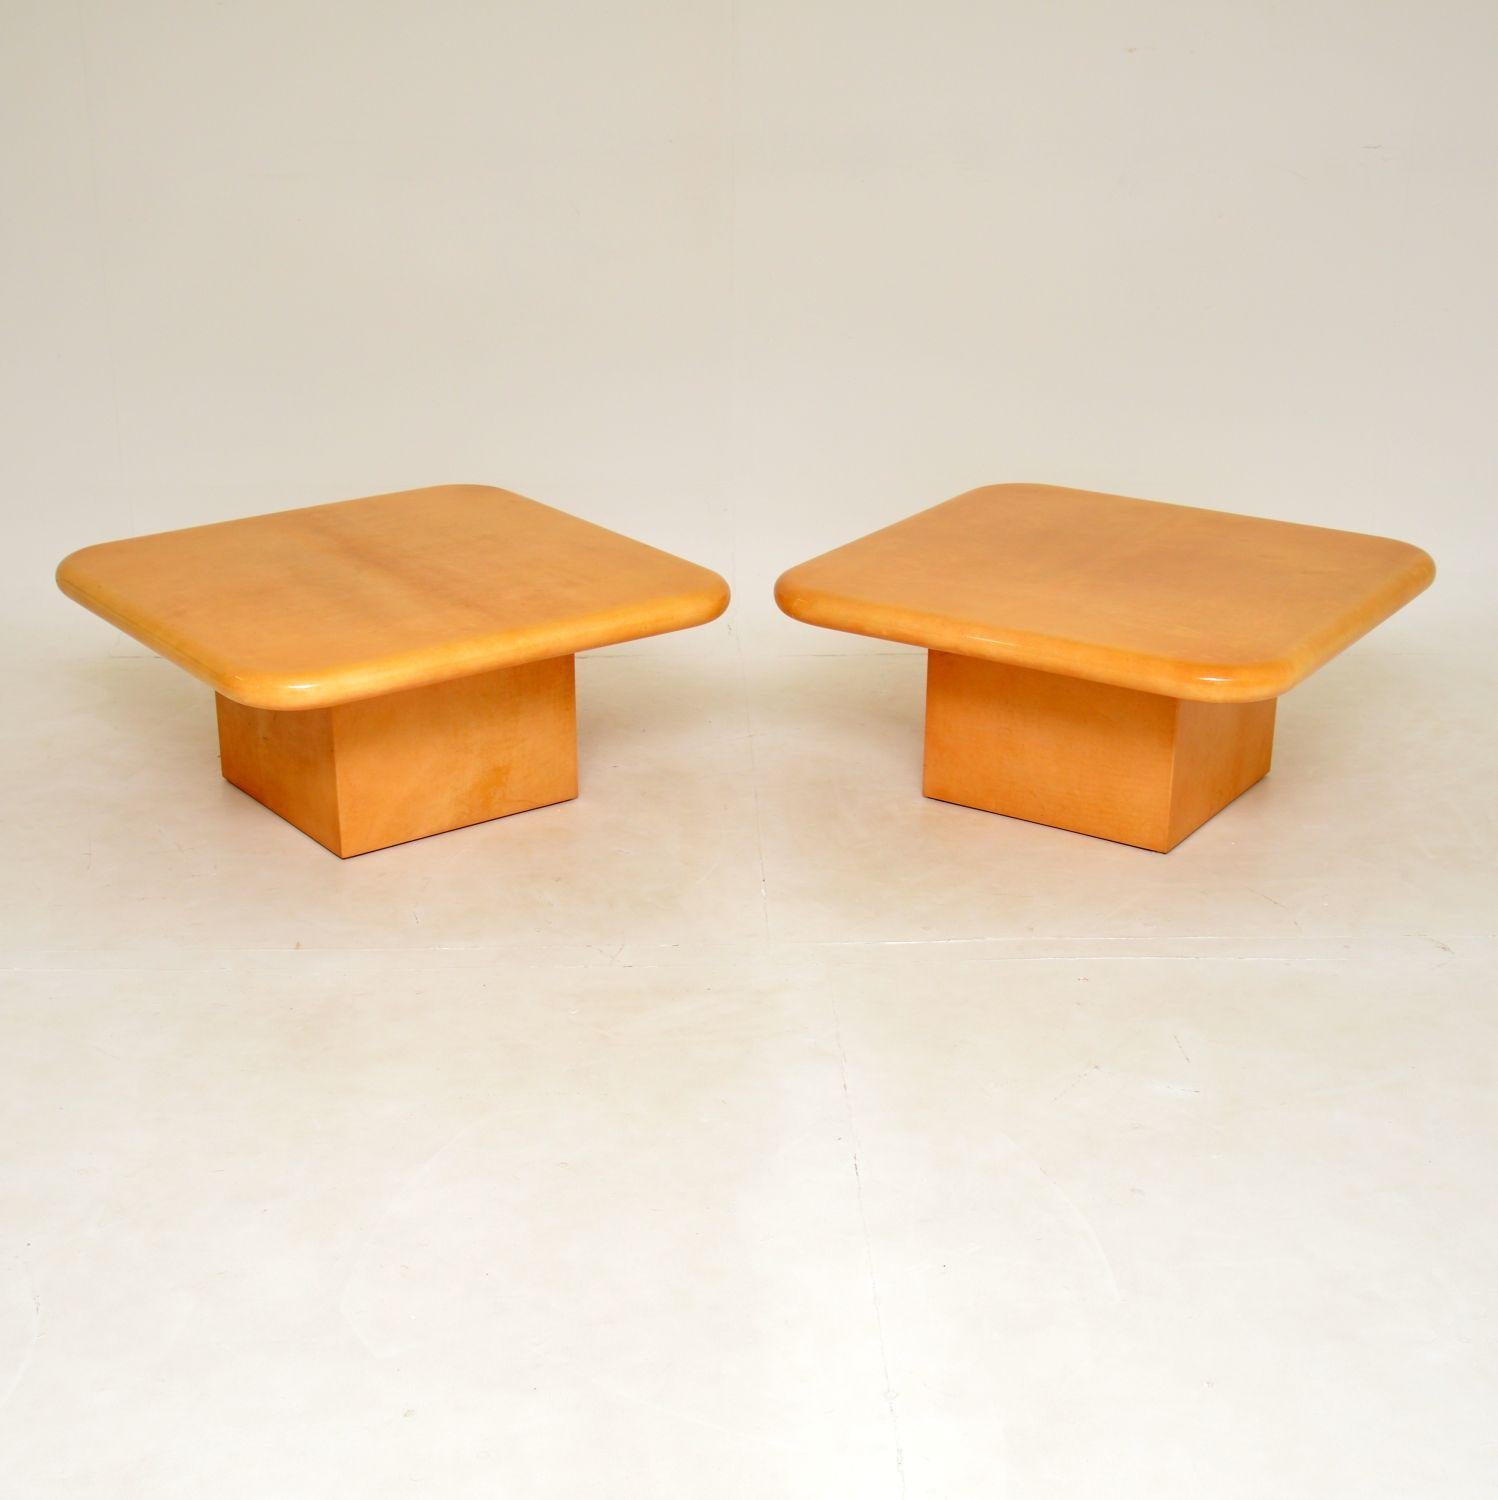 A superb pair of original Aldo Tura low tables in lacquered goatskin parchment. These made made in Italy, they date from the 1970’s.

They are a great size, very large and perfect for use as coffee tables or side tables. The quality as with all